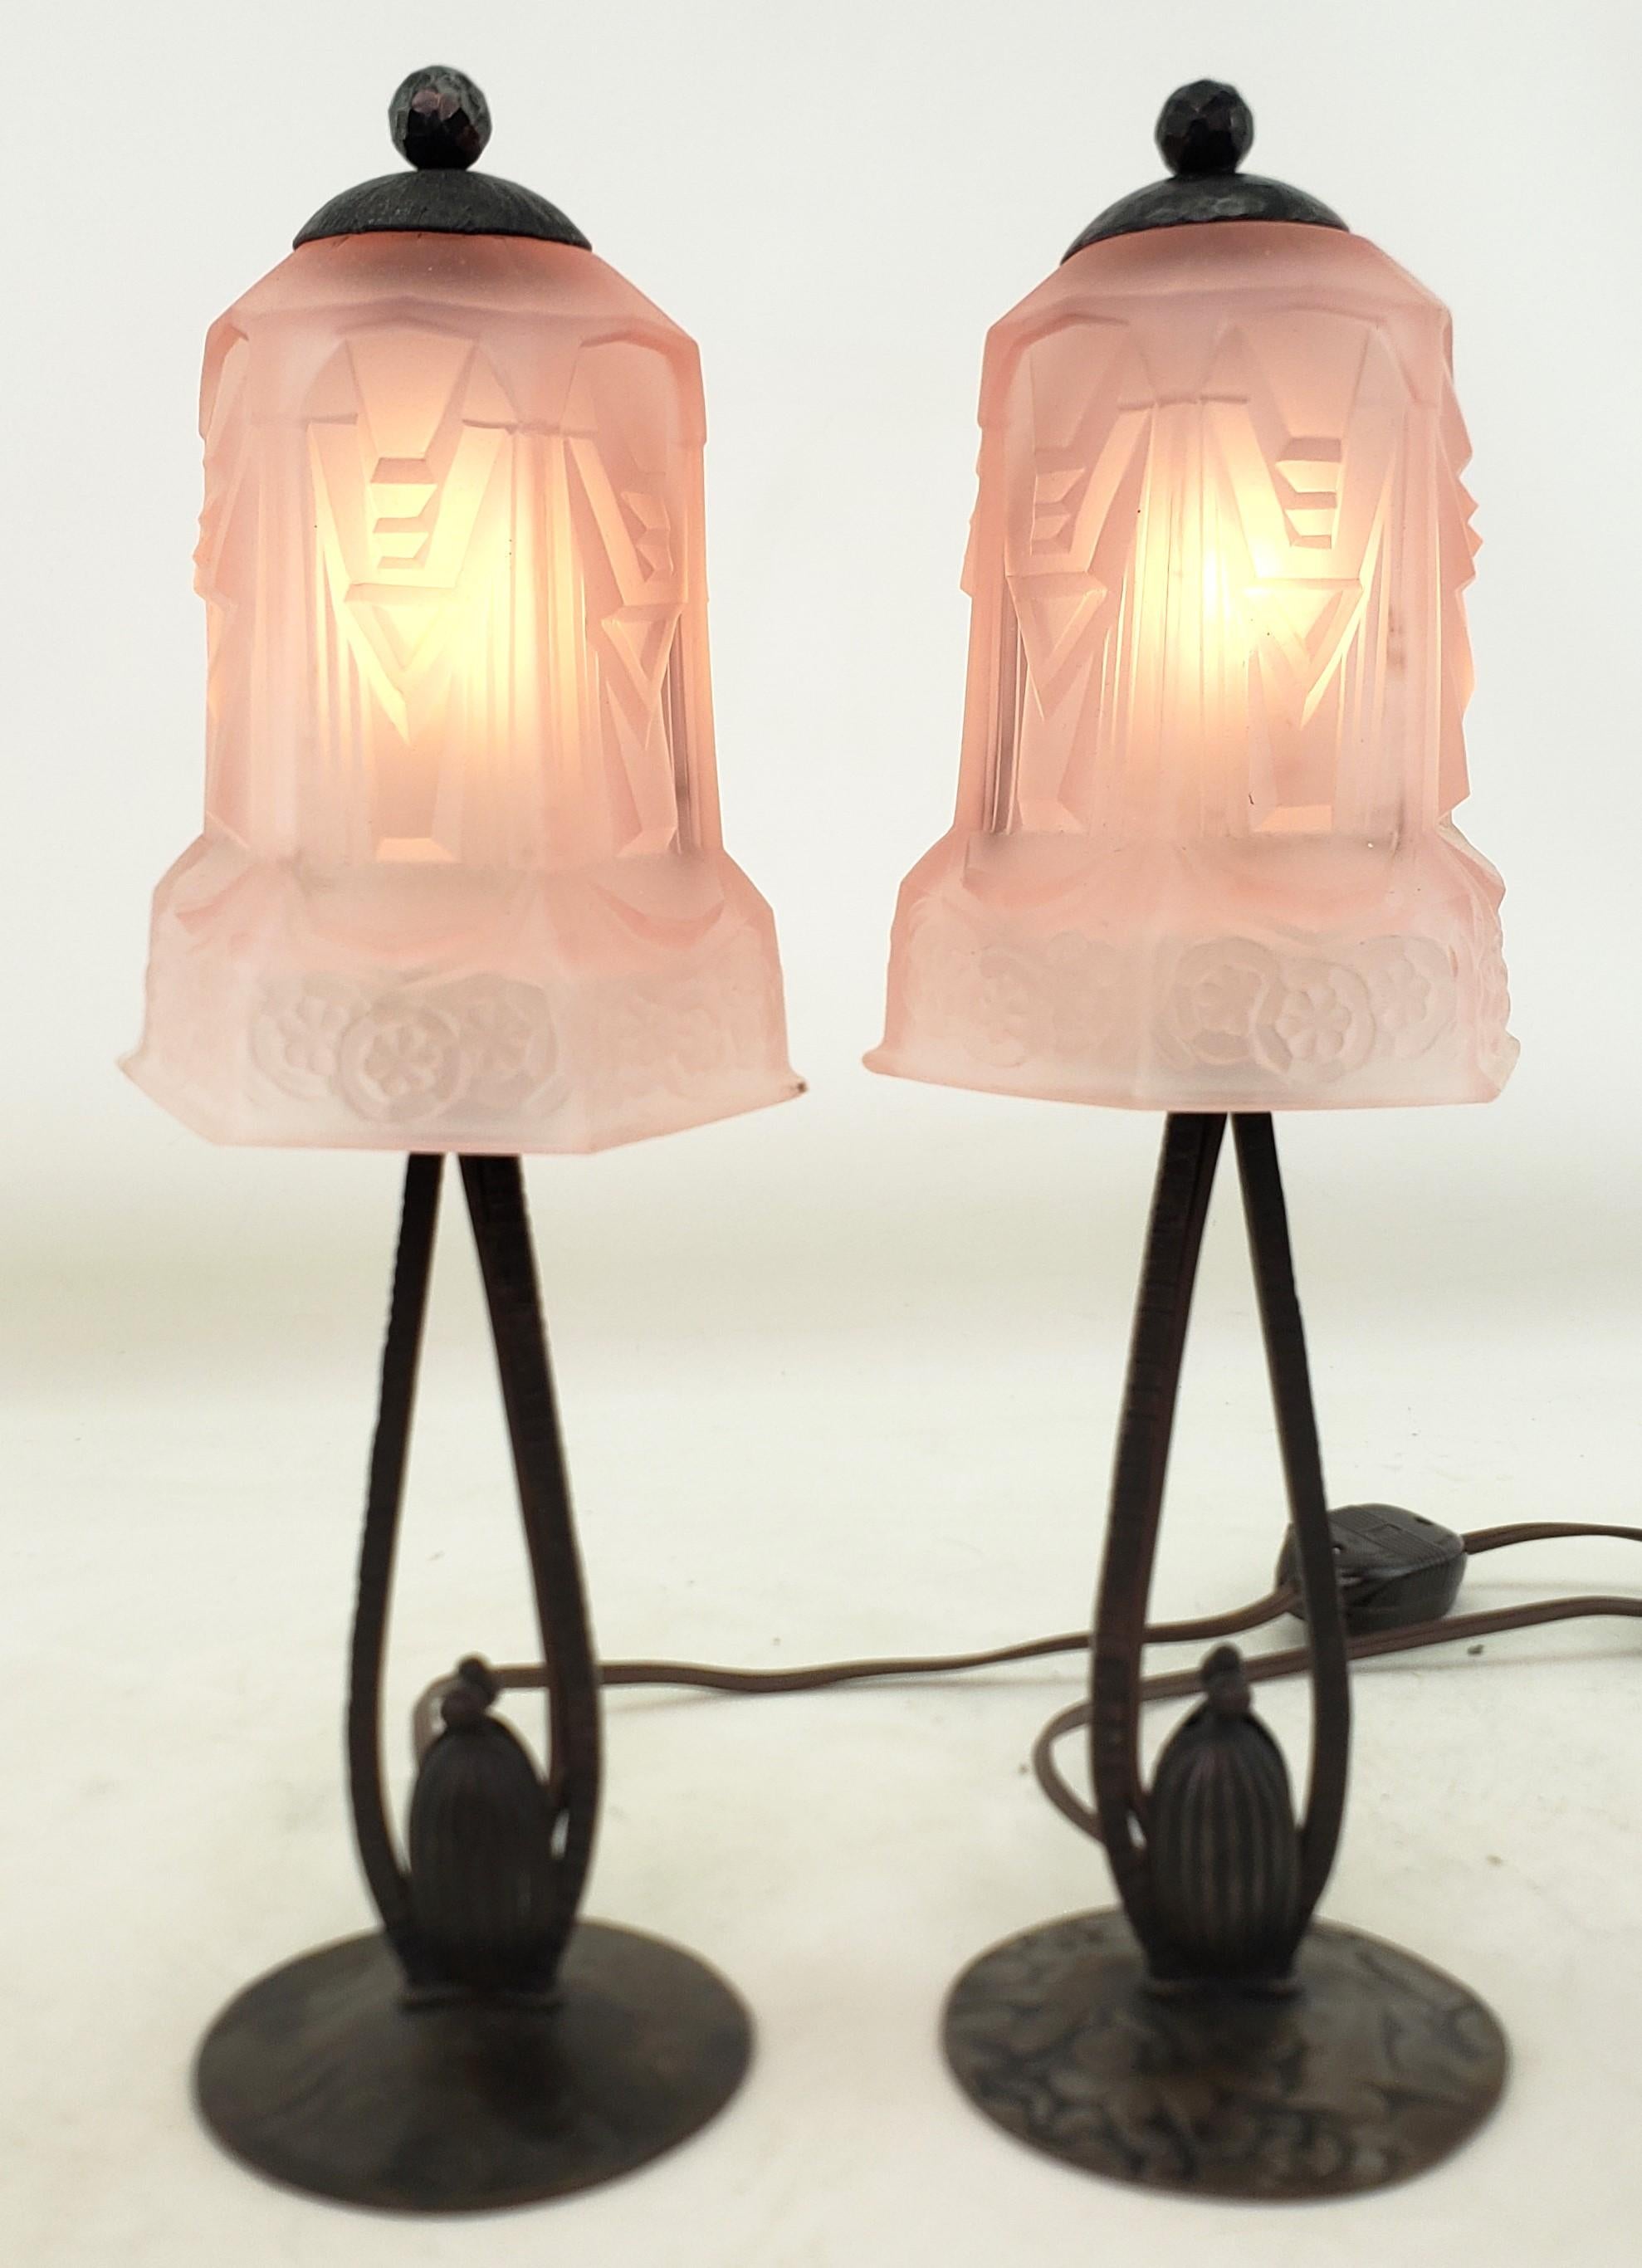 Machine-Made Pair of Antique Art Deco Bourdoir or Table Lamps with Frosted Pink Glass Shades For Sale